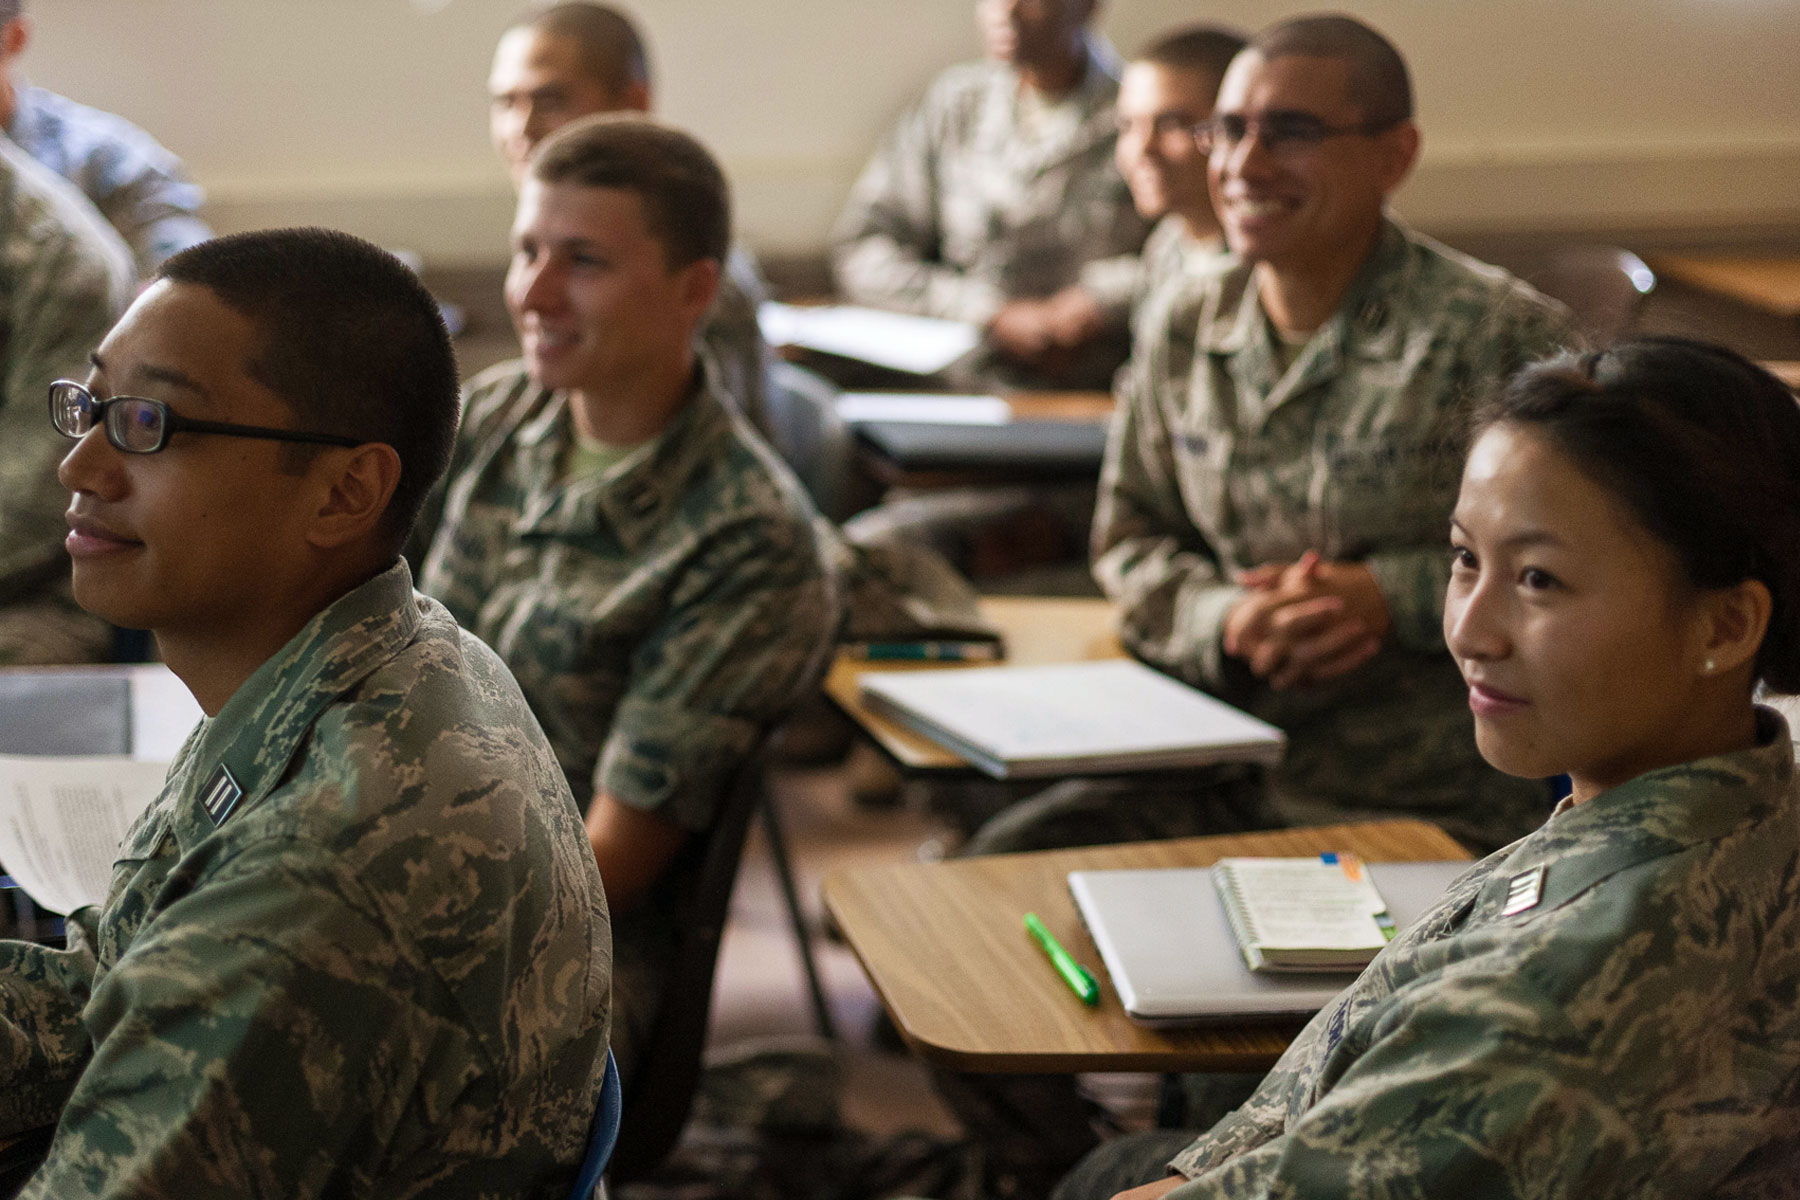 Military and Veteran students in the classroom.